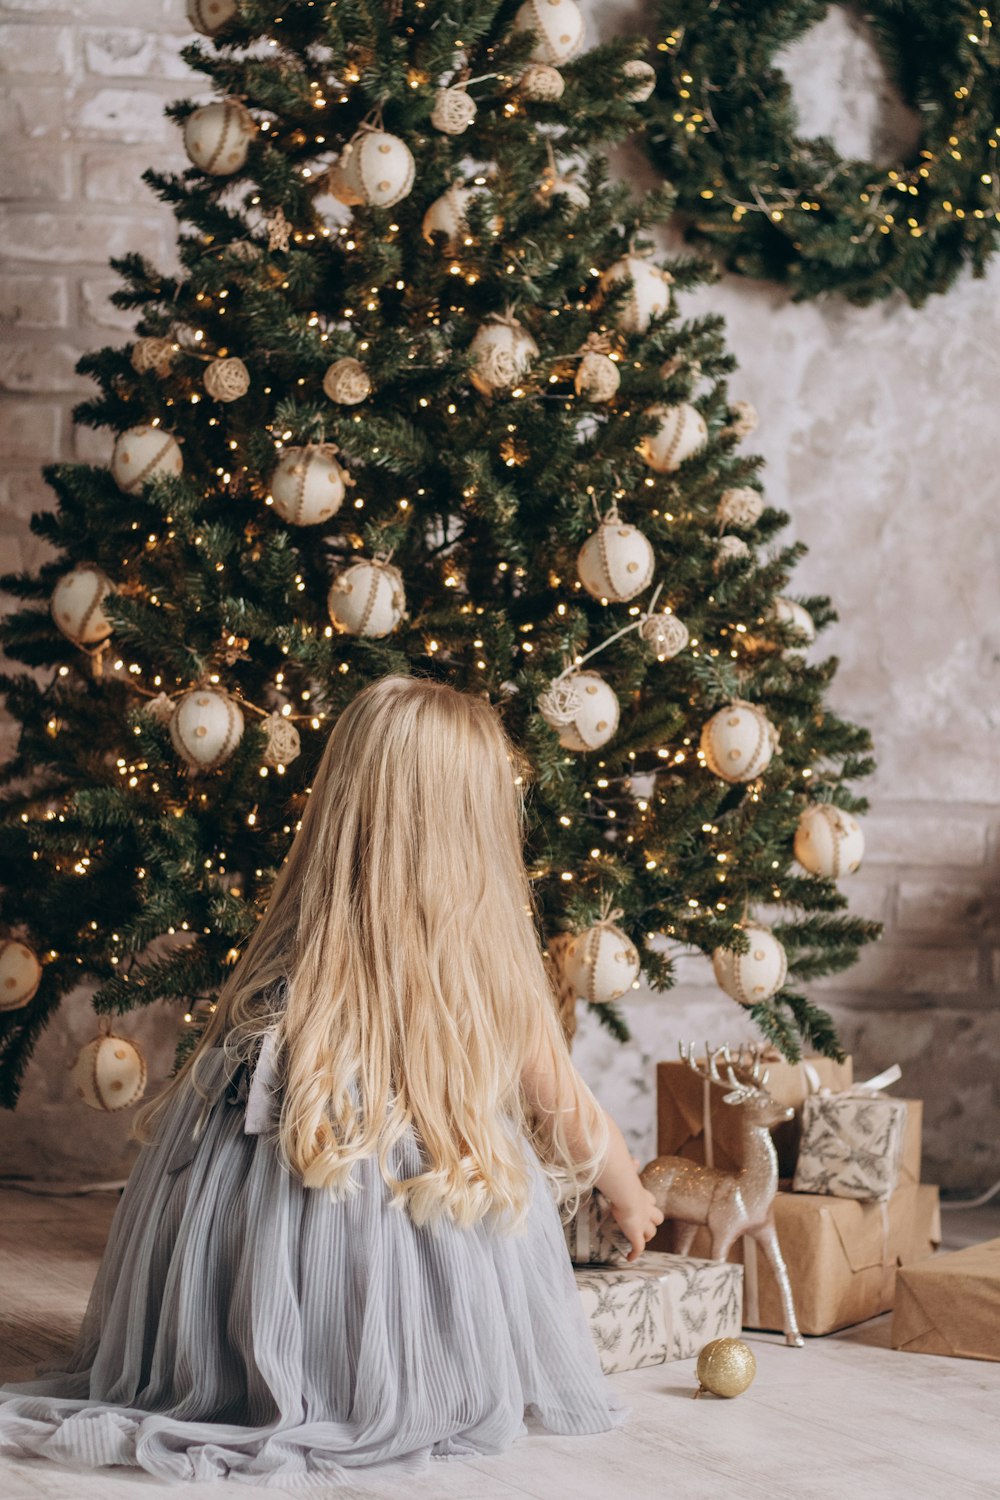 a little girl sitting in front of a christmas tree